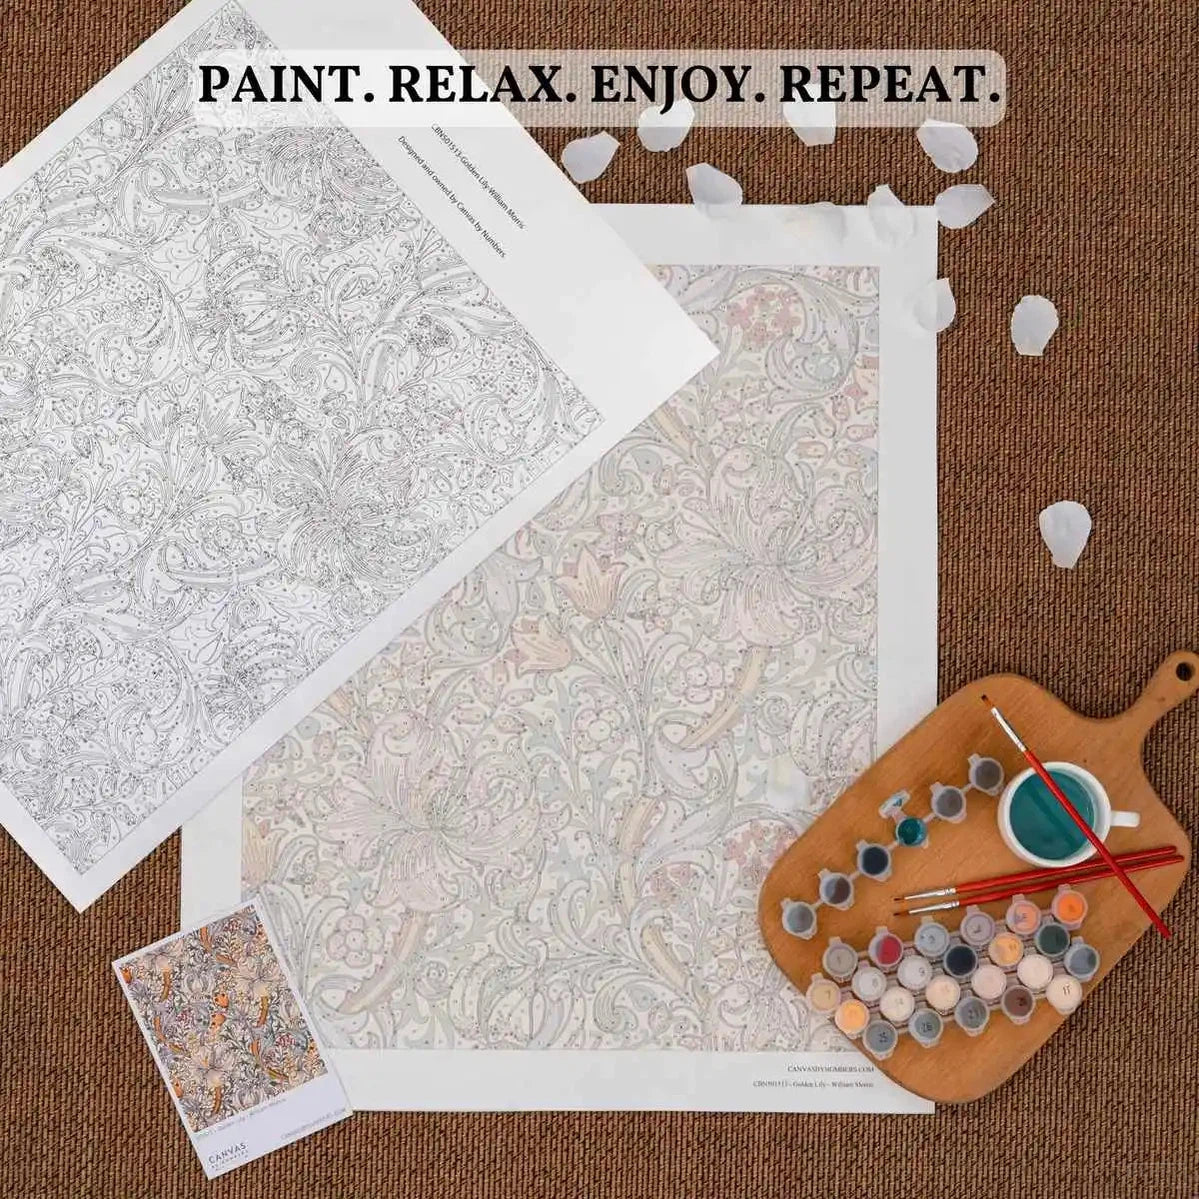 Shoes - Paint by Numbers-You'll love our Shoes - Vincent Van Gogh paint by numbers kit. Shop more than 500 paintings at Canvas by Numbers. Up to 50% Off! Free shipping and 60 days money-back.-Canvas by Numbers